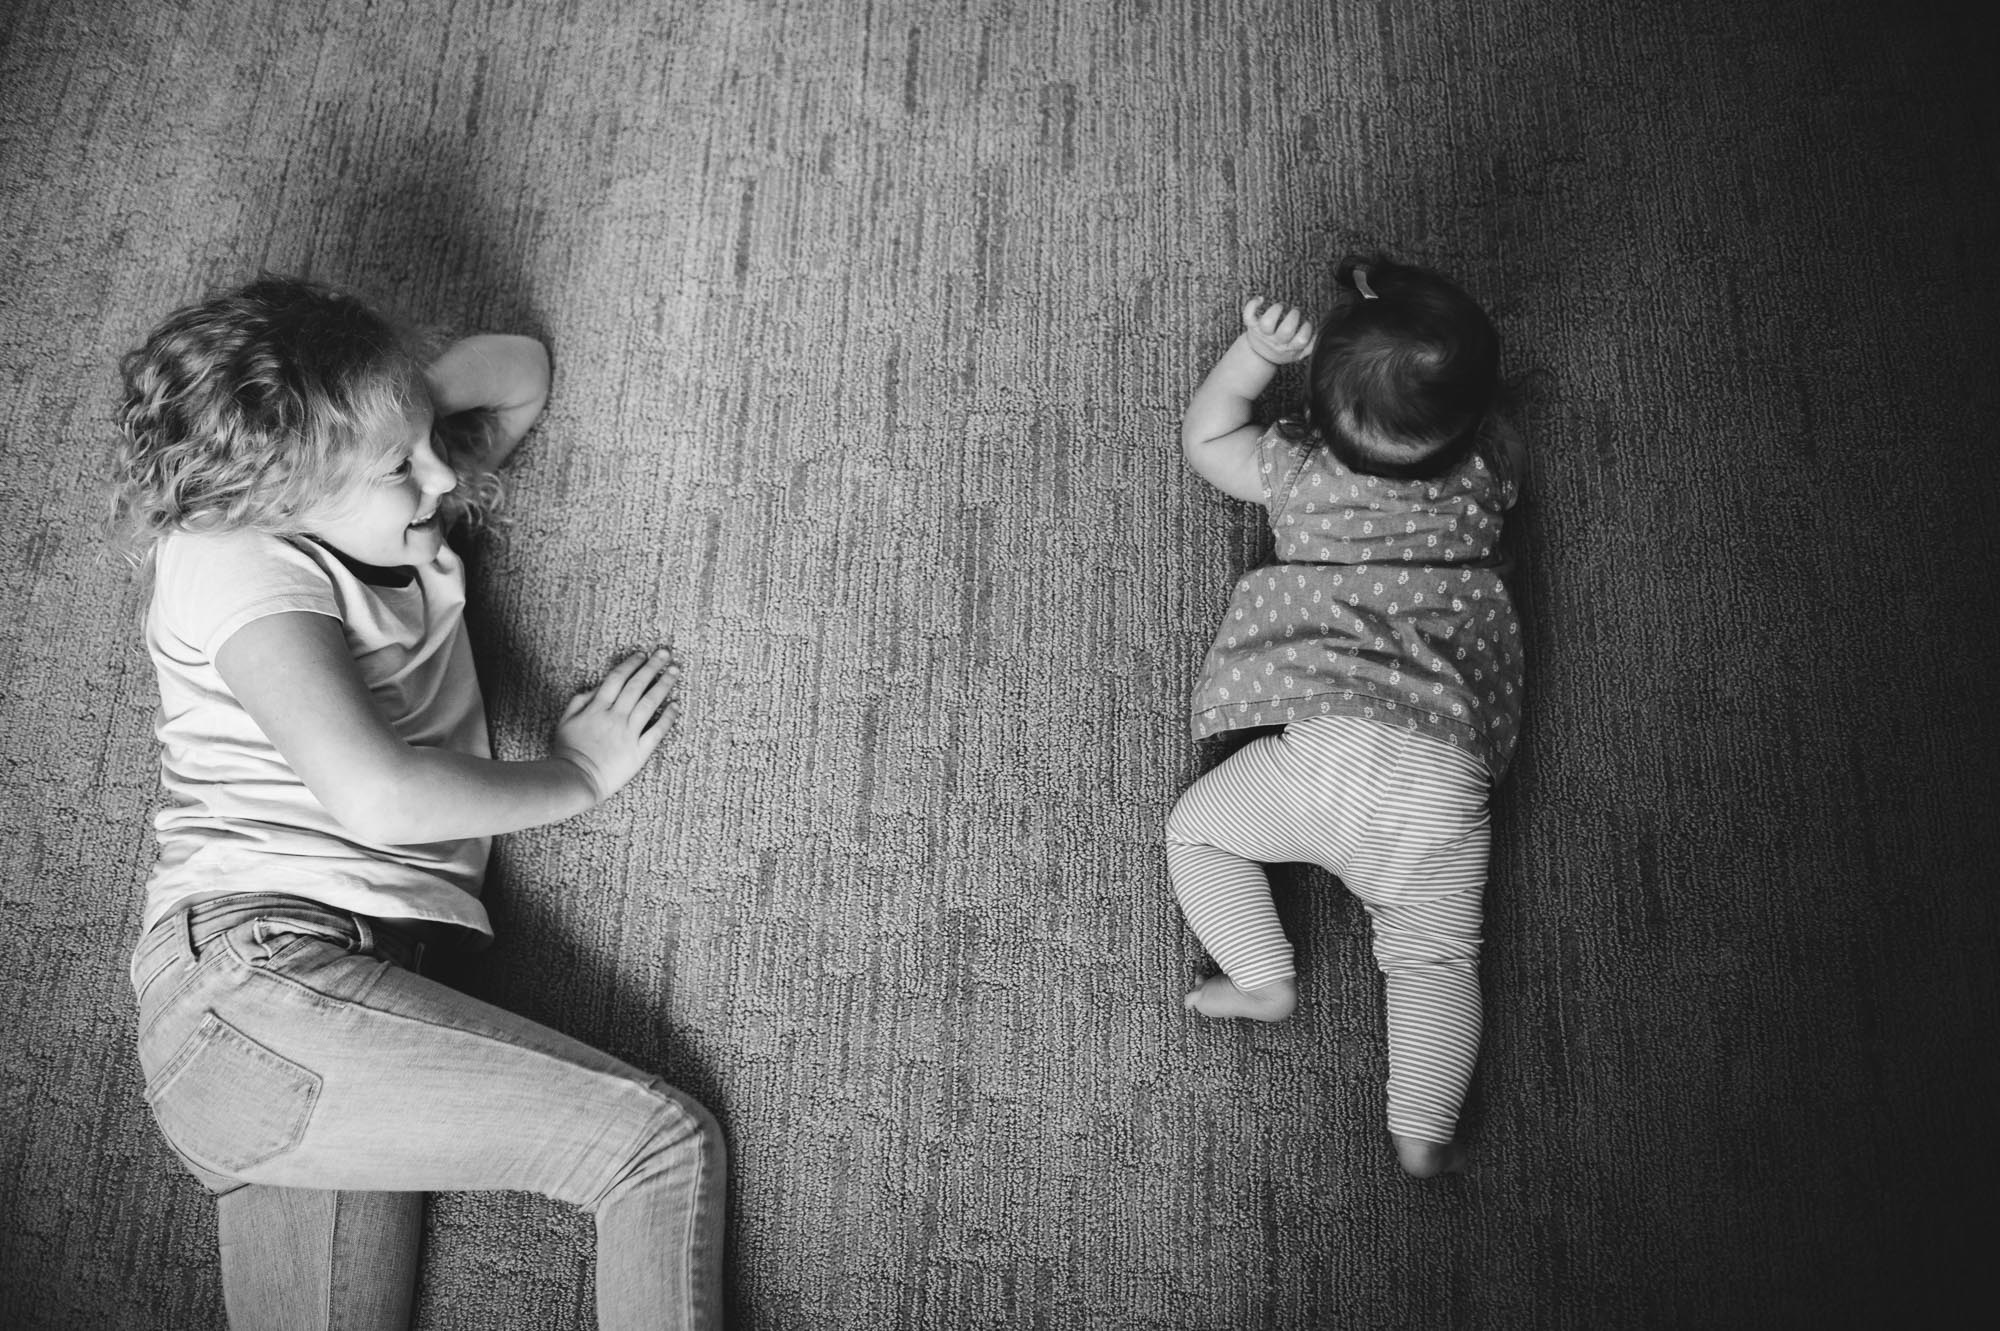 A baby practices crawling with her sister during a photo session